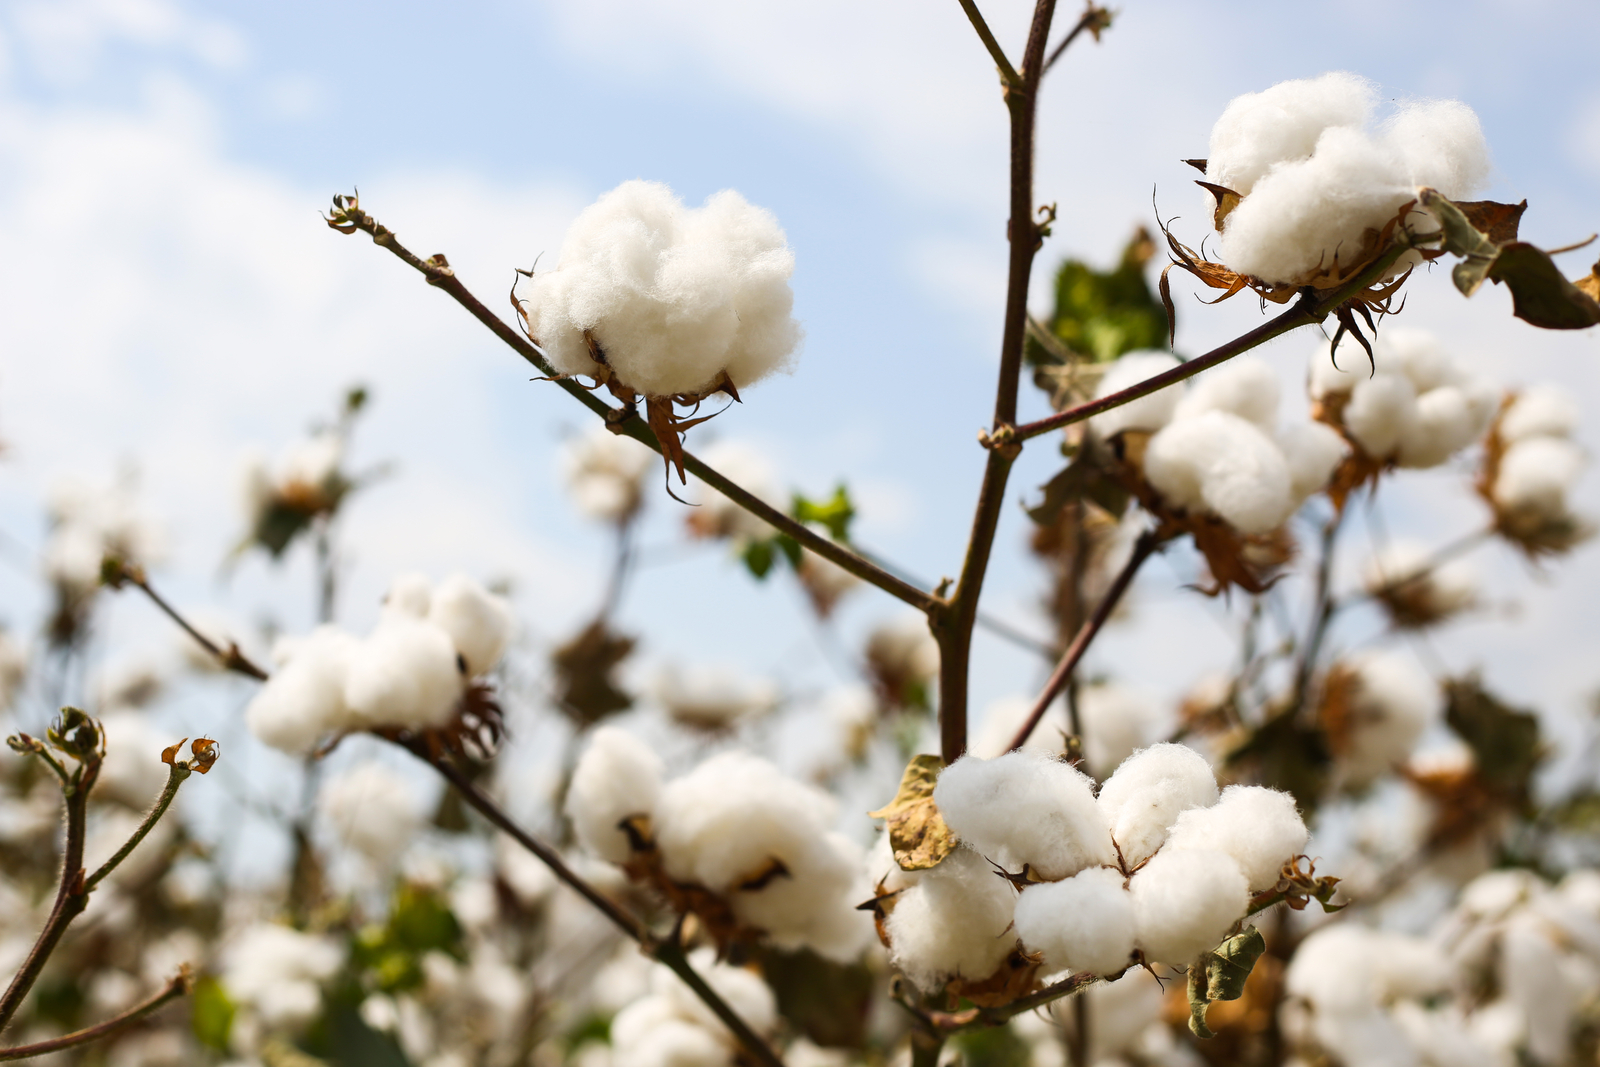 Growth of cotton